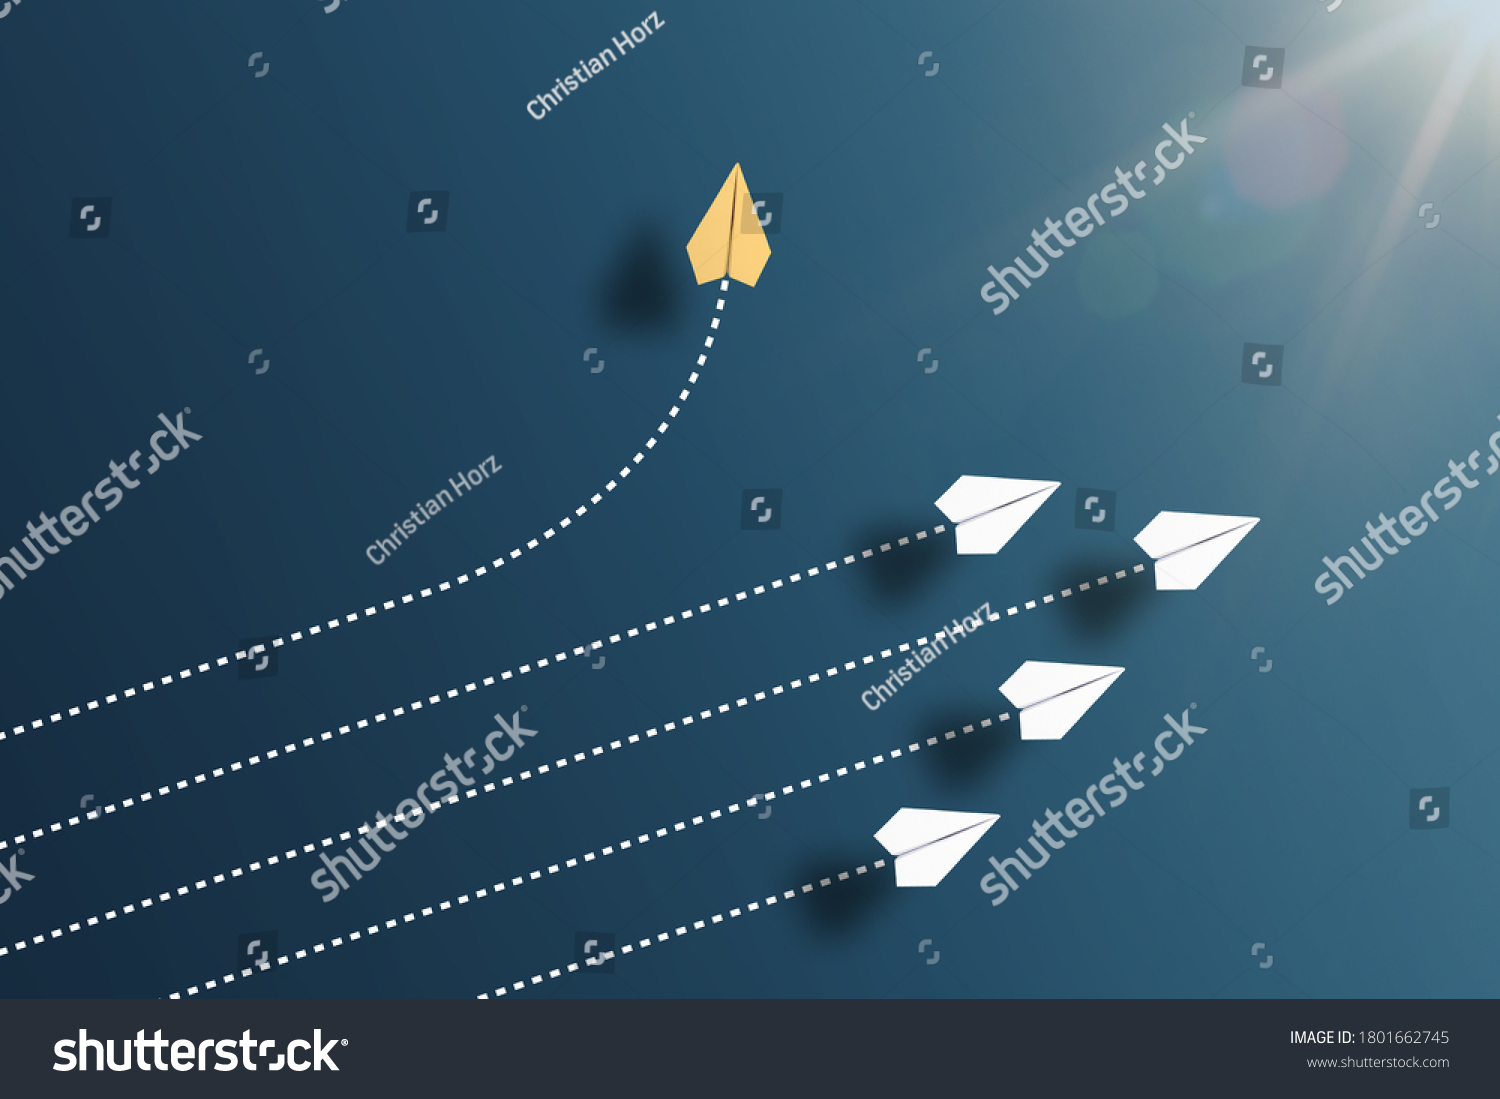 paper planes flying in formation in one direction on blue background and one paper glider going in different direction, breaking new ground and stepping out of the line concept #1801662745